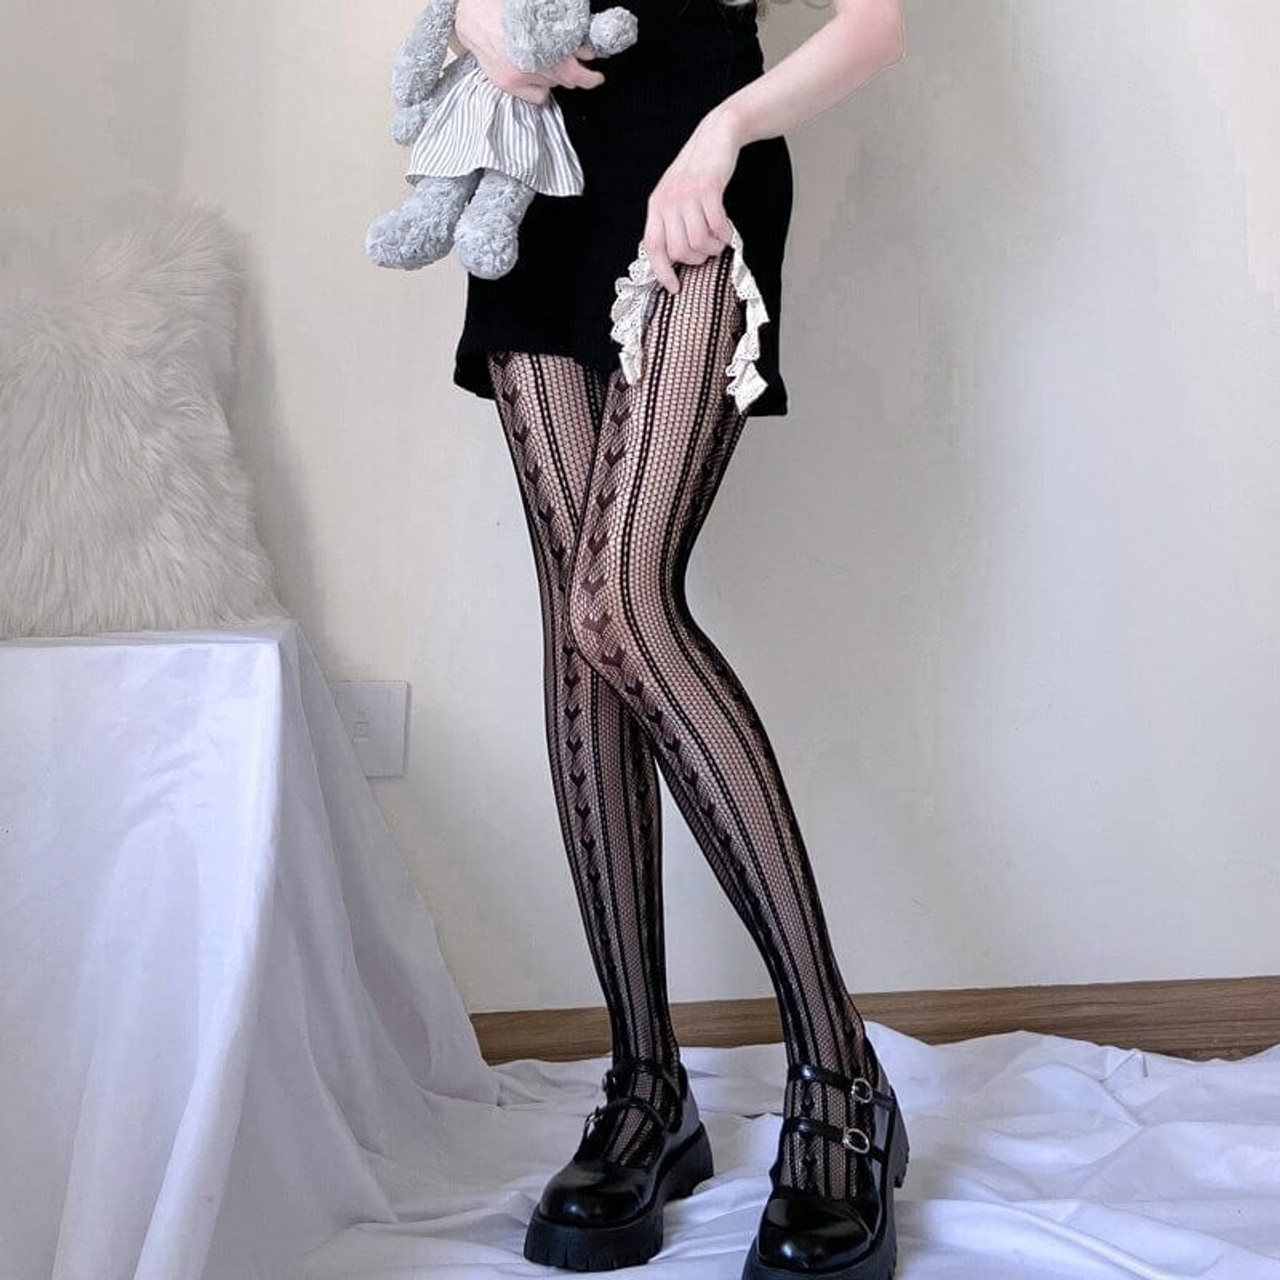 US$ 6.99 - Y2K Rose Lace Fishnet Gothic Lolita Tights - m.